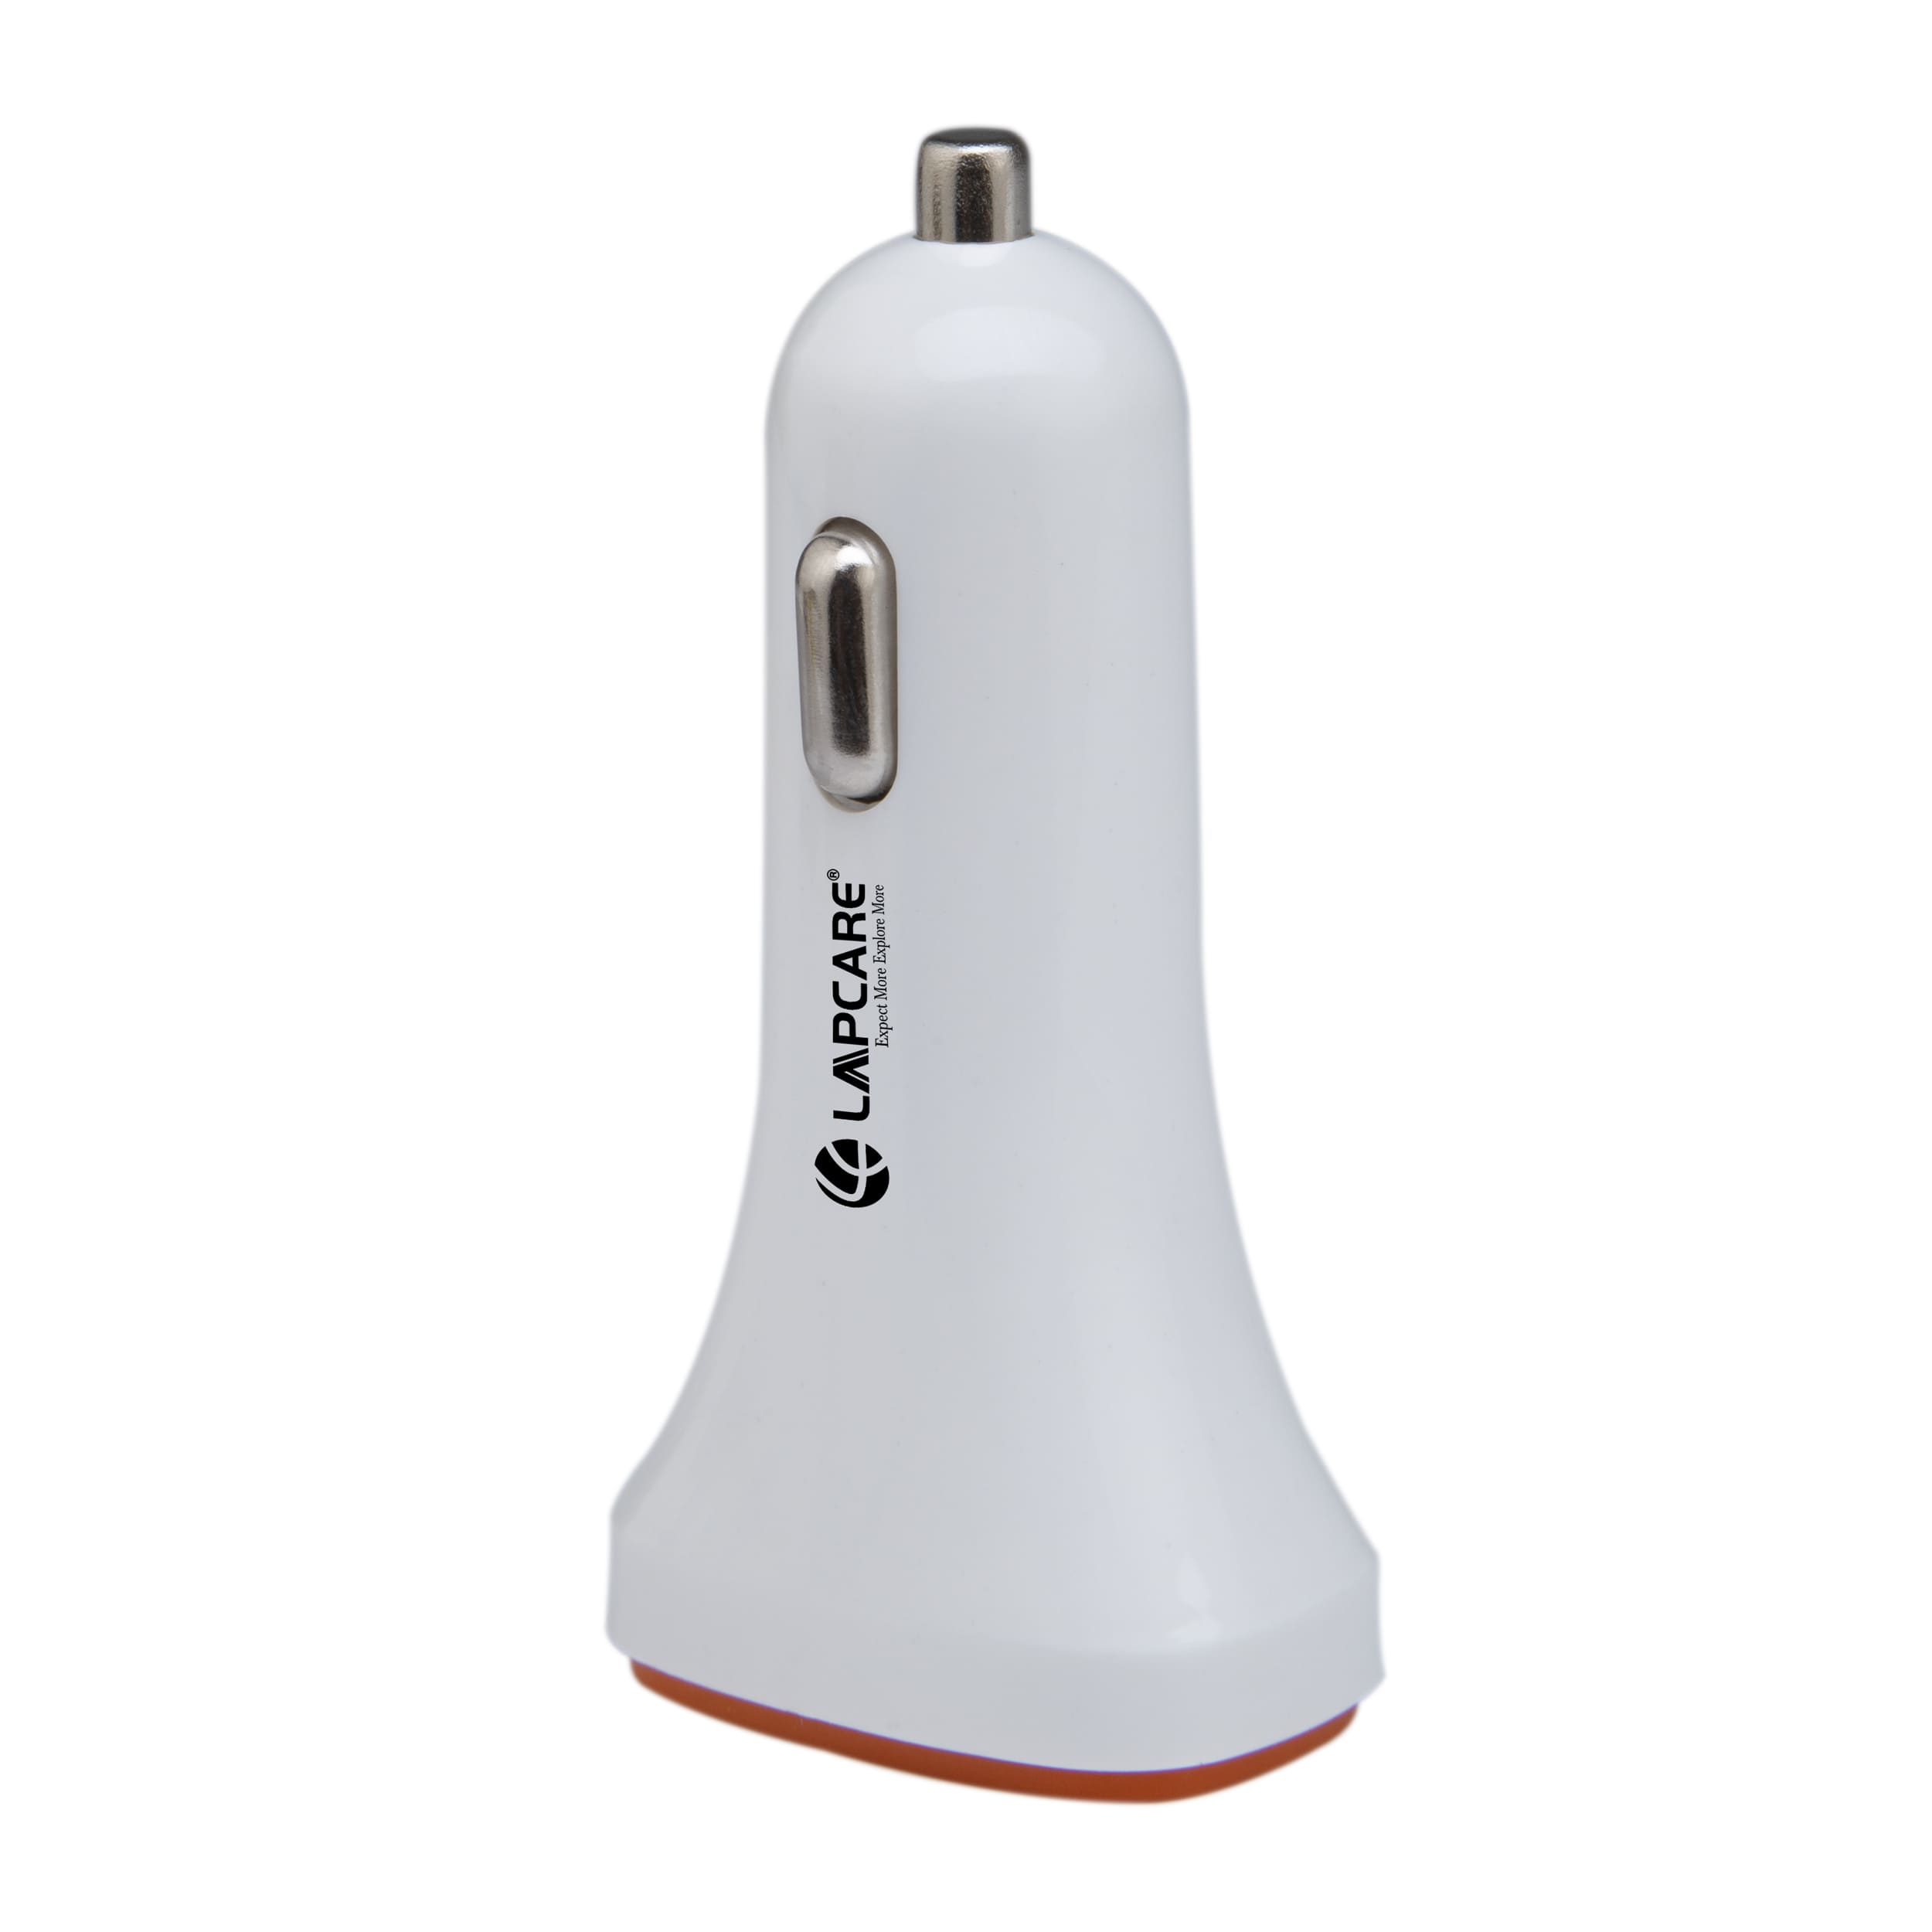 Lapcare Car Charger 30W with 2 USB Ports – White(LCC-201)